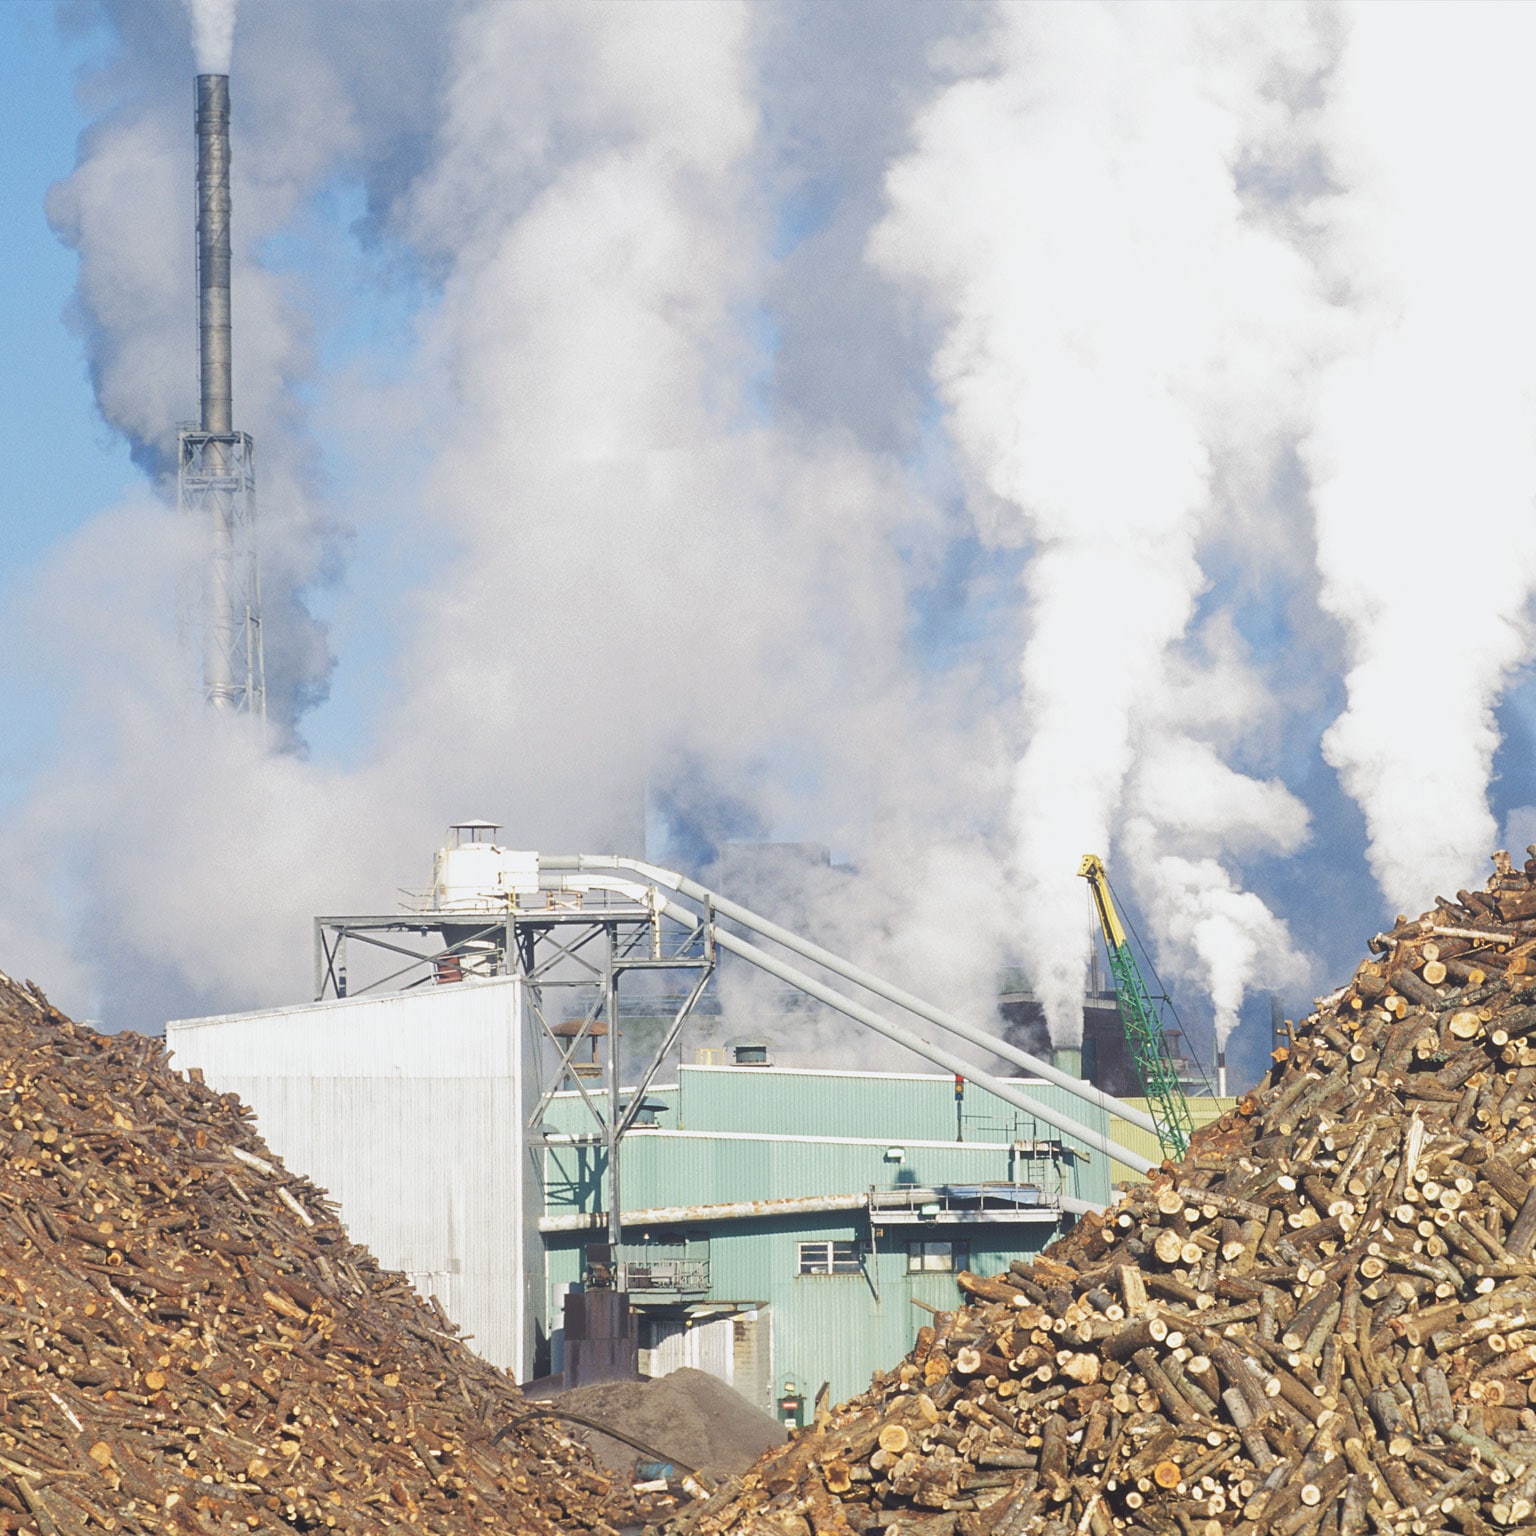 Paper mill to increase recycling capacity